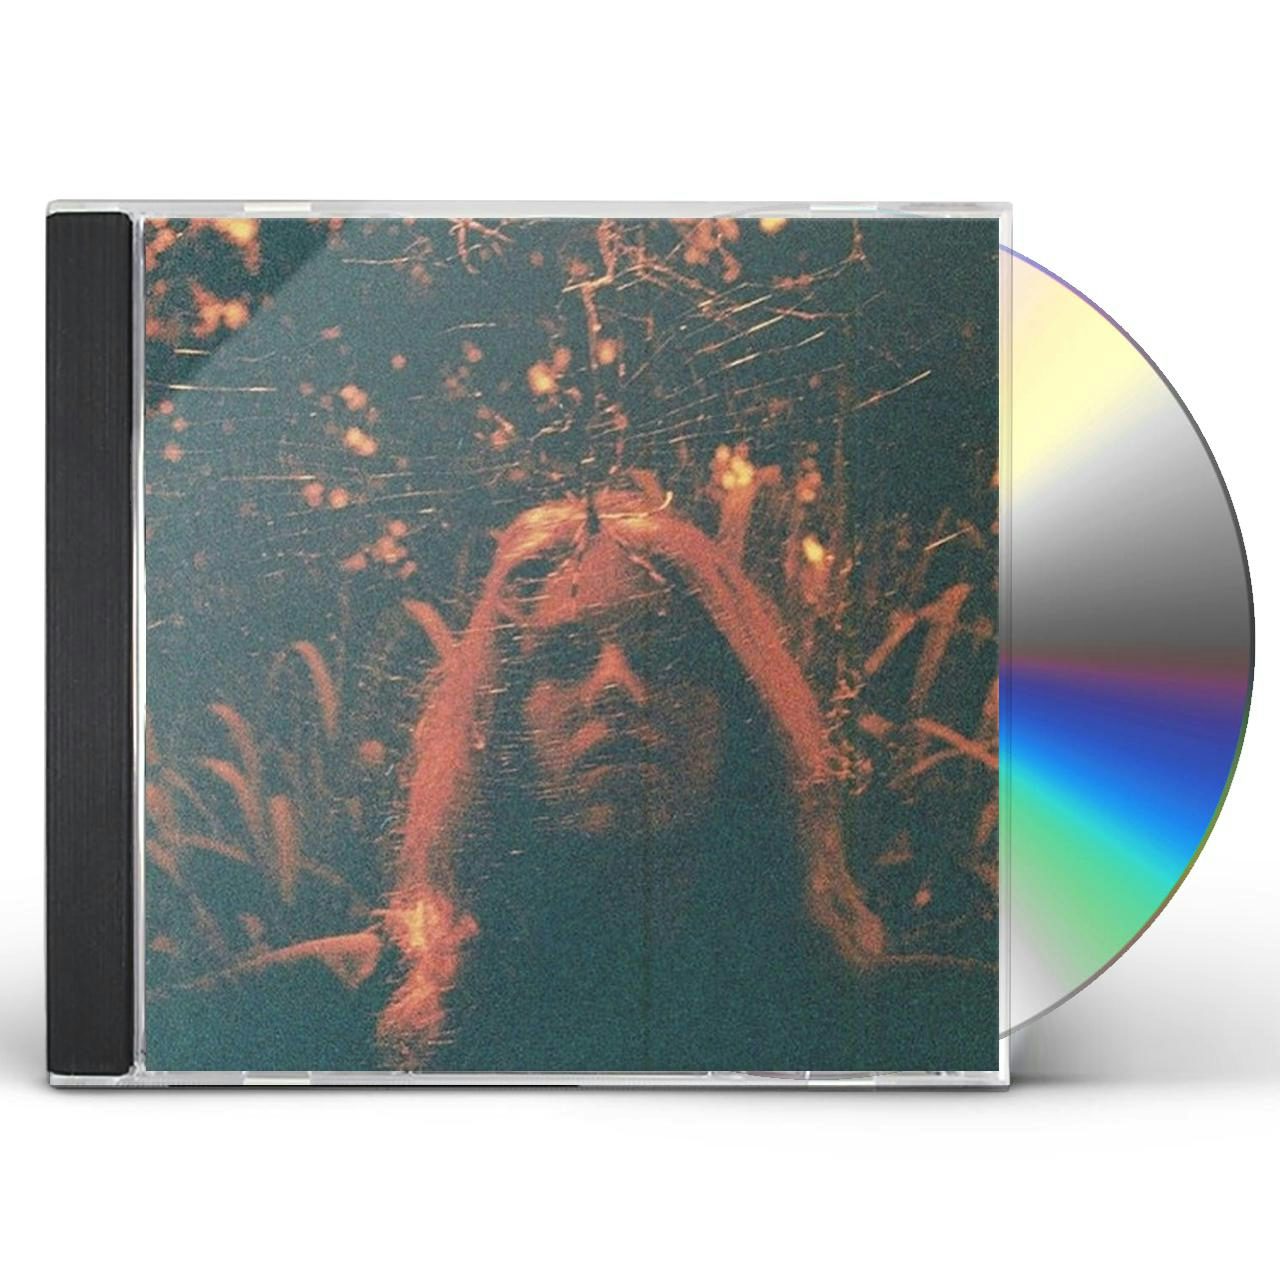 turnover peripheral vision album meaning